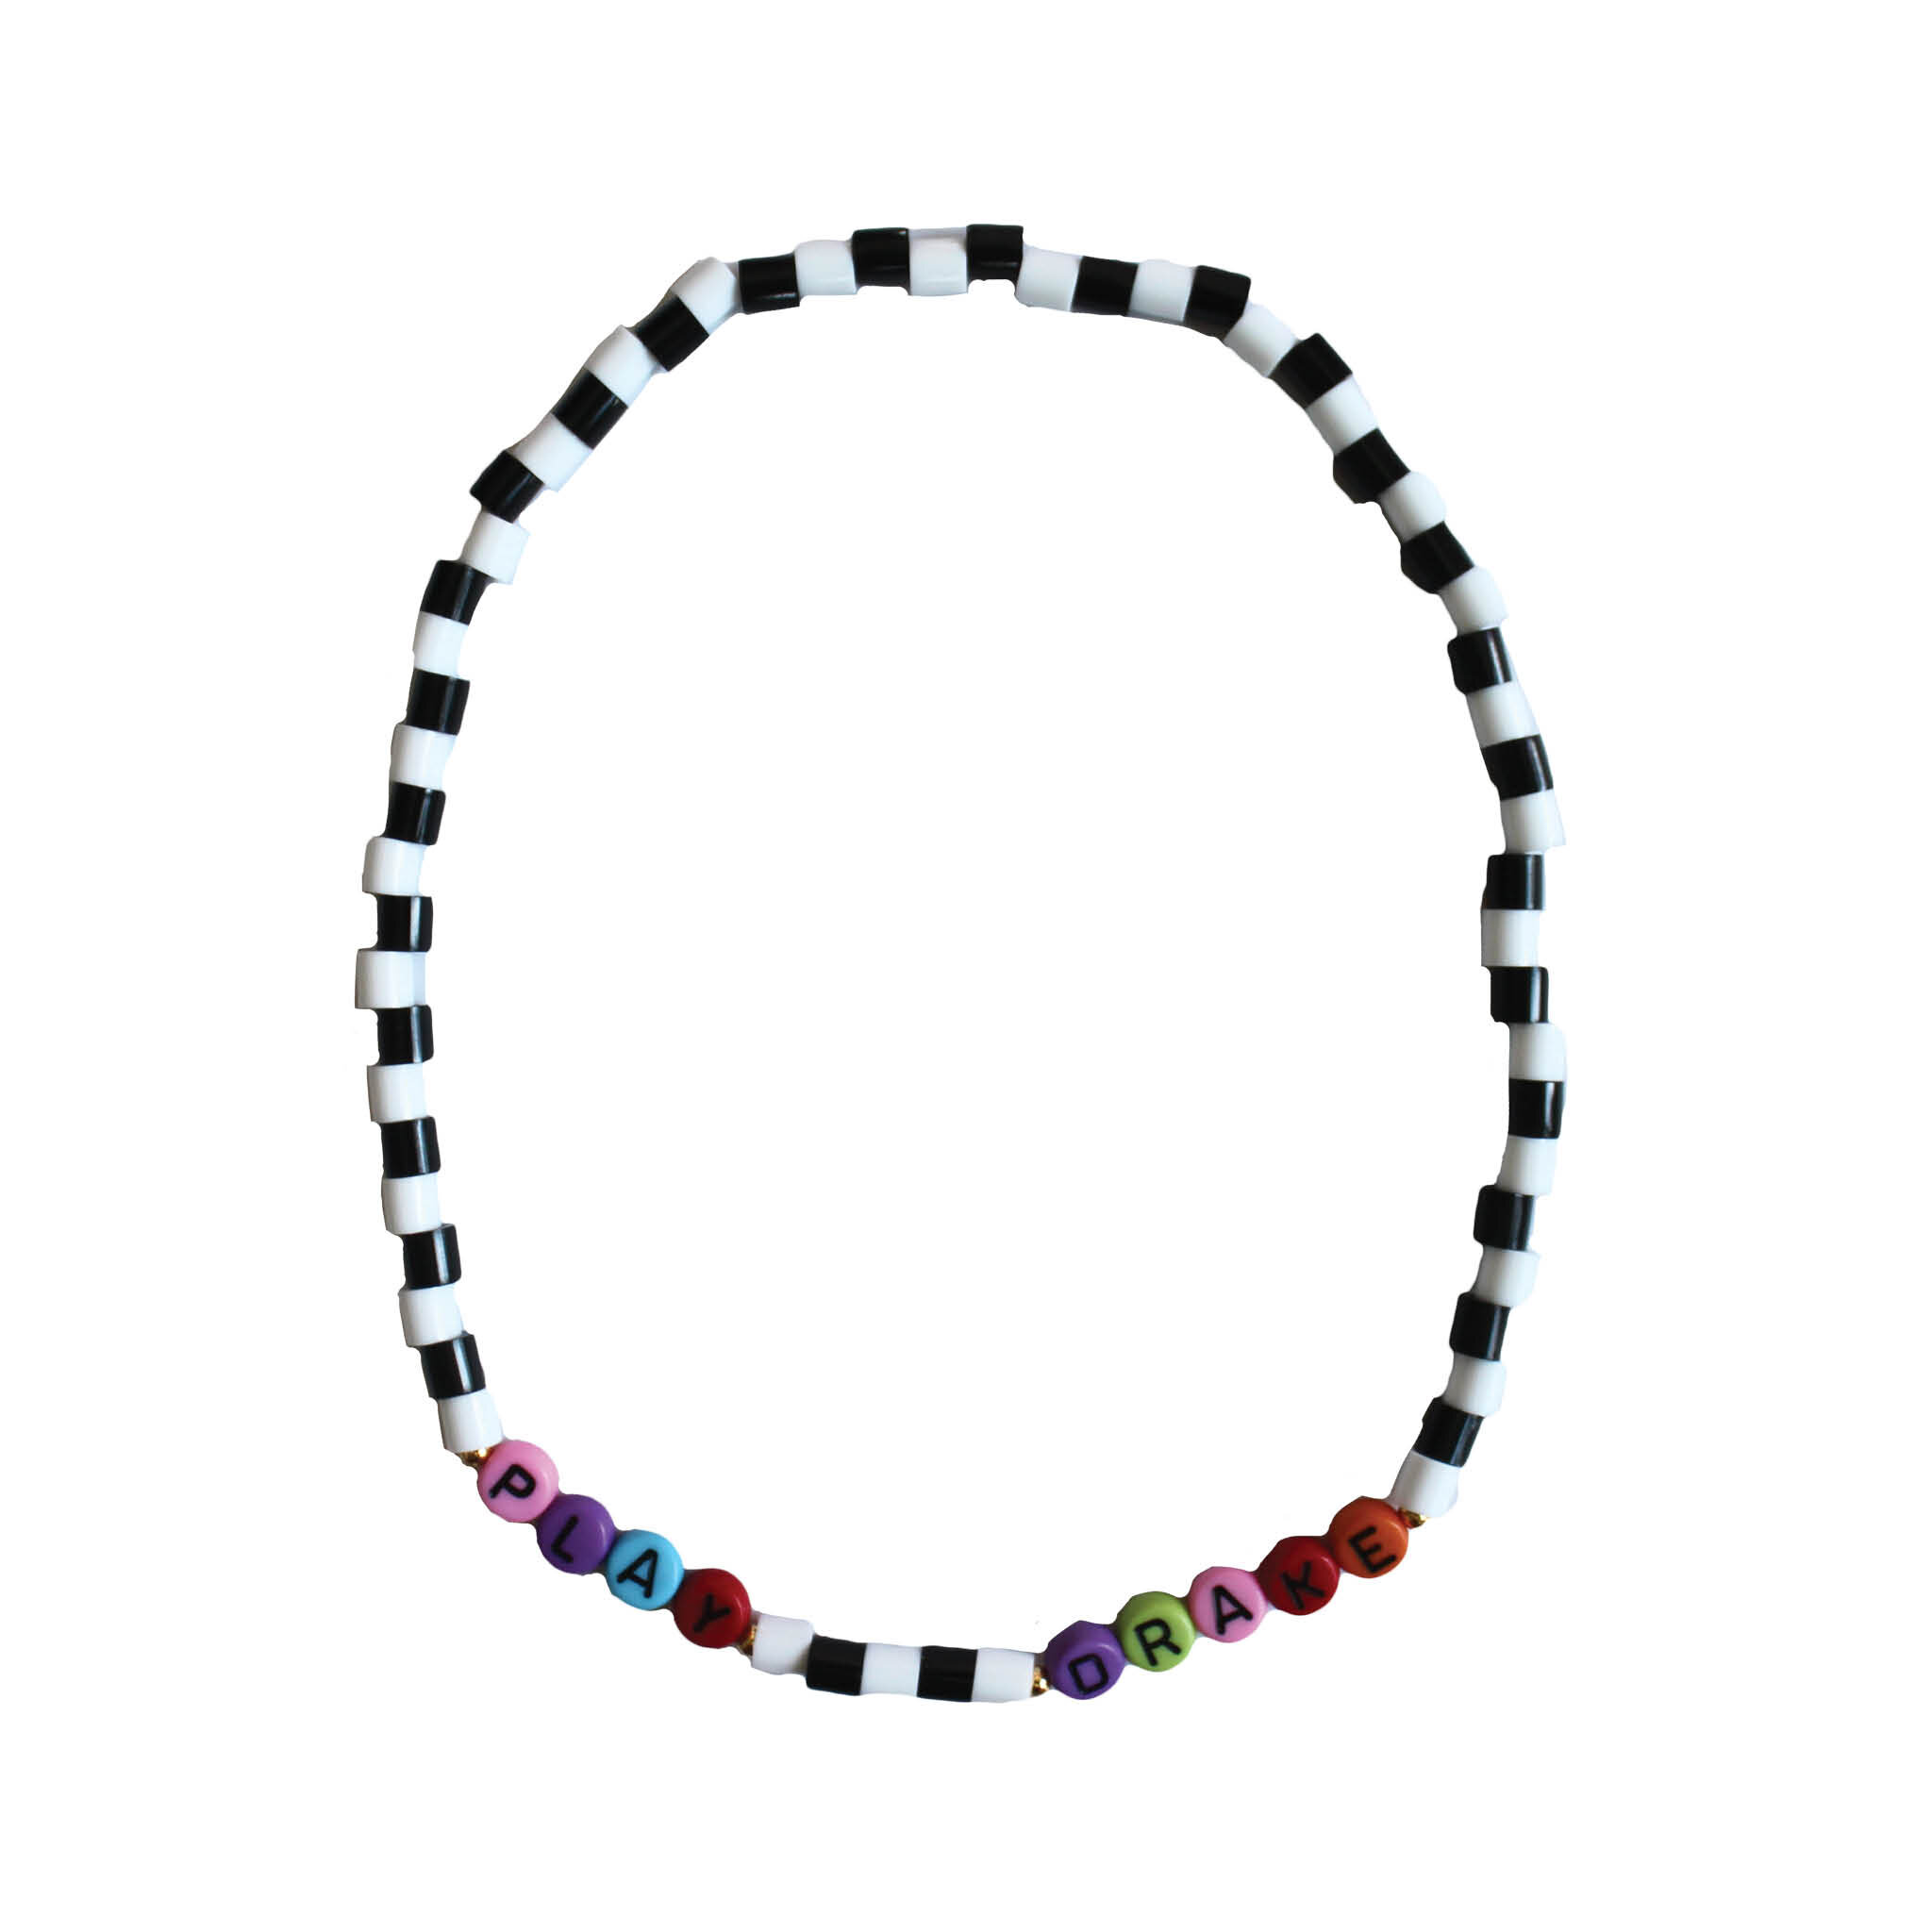 JACQUIE AICHE TURQUOISE THUNDERBIRD ON RAINBOW BEADED NECKLACE - Capitol